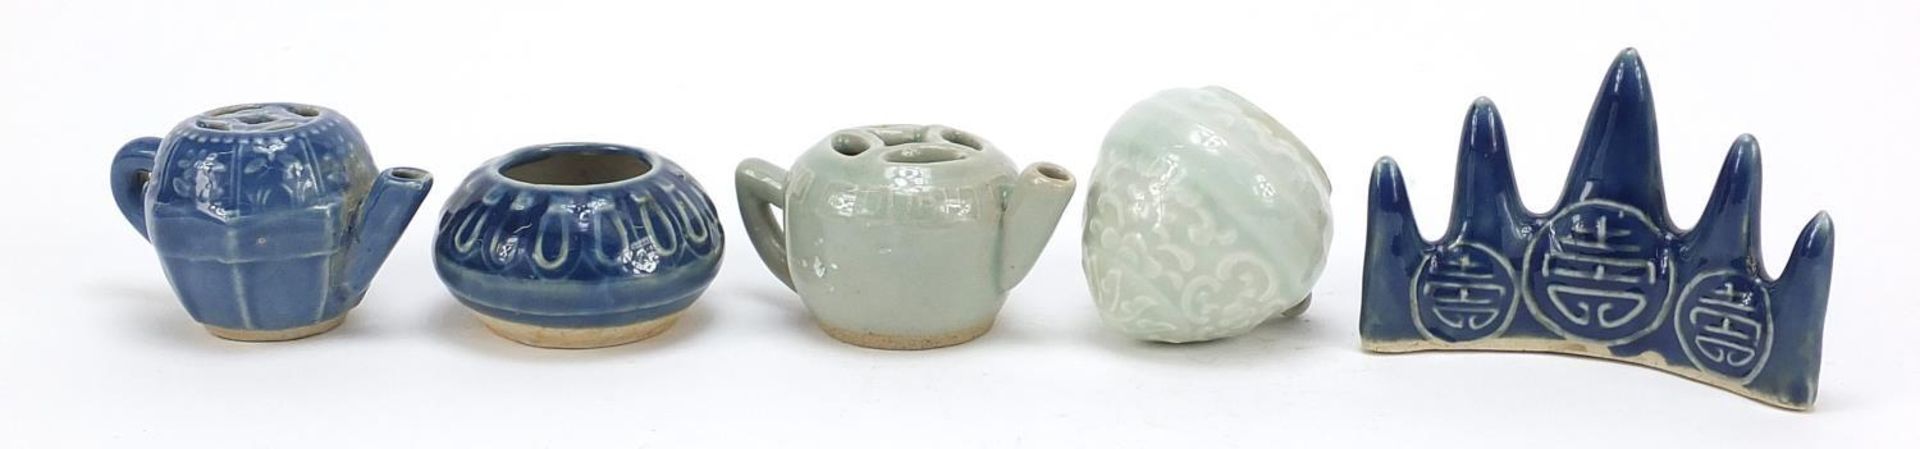 Chinese porcelain including a blue glazed brush rest and two teapots, the largest 9.5cm wide